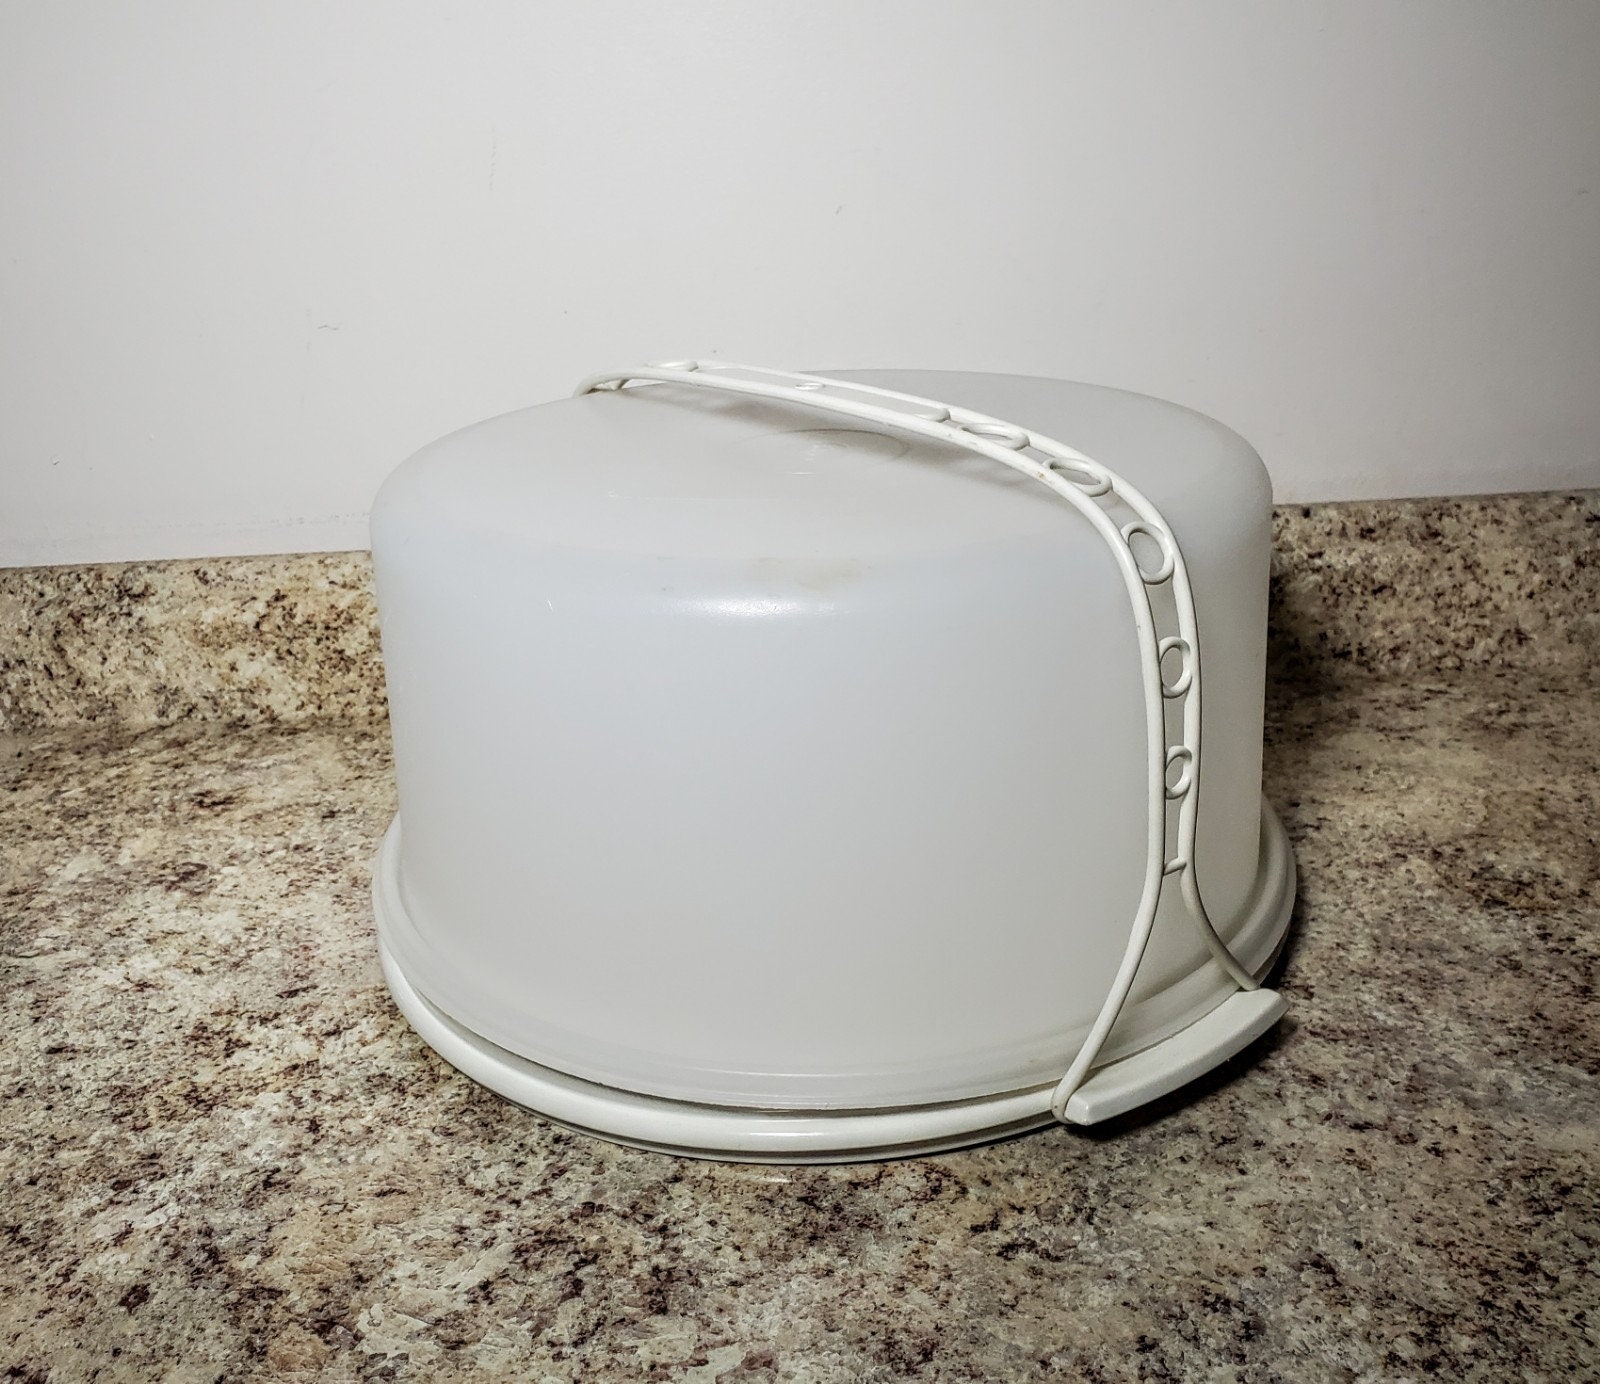 TUPPERWARE HUGE ROUND CAKE TAKER w/Handle - At Home or On-the-GO - NEW COLOR